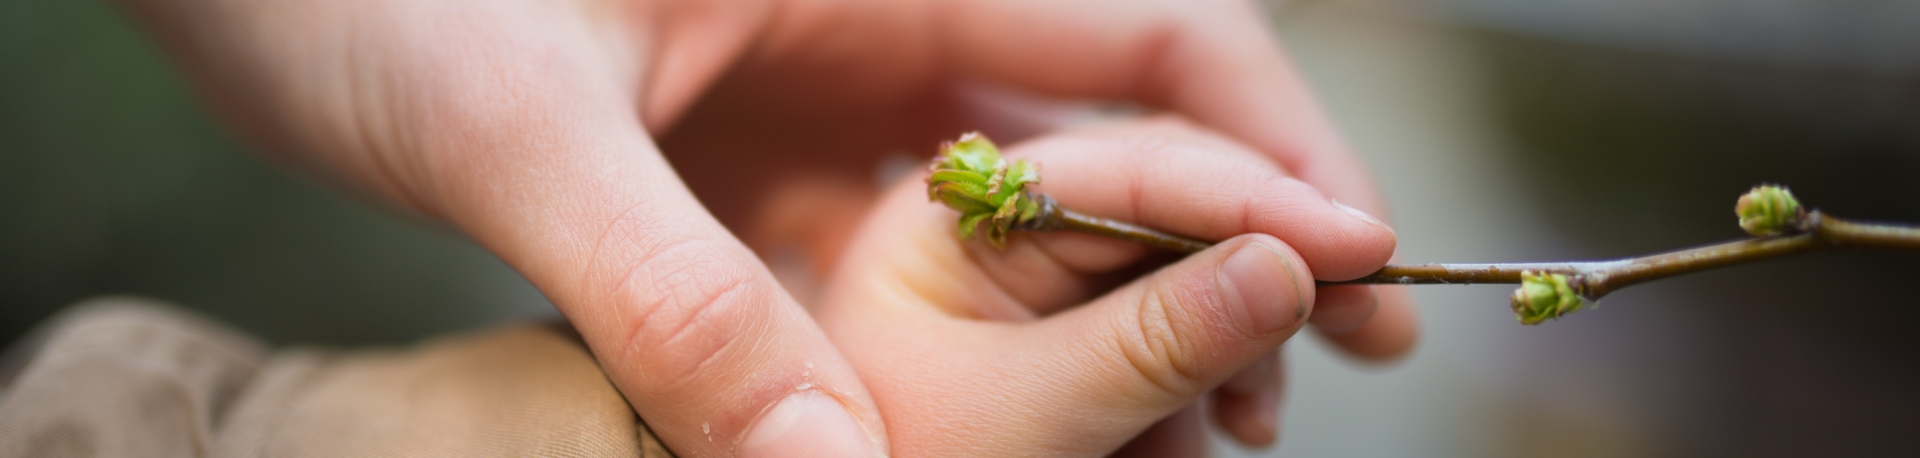 Image showing a close up of an adult's and a child's hand holding a plant shoot